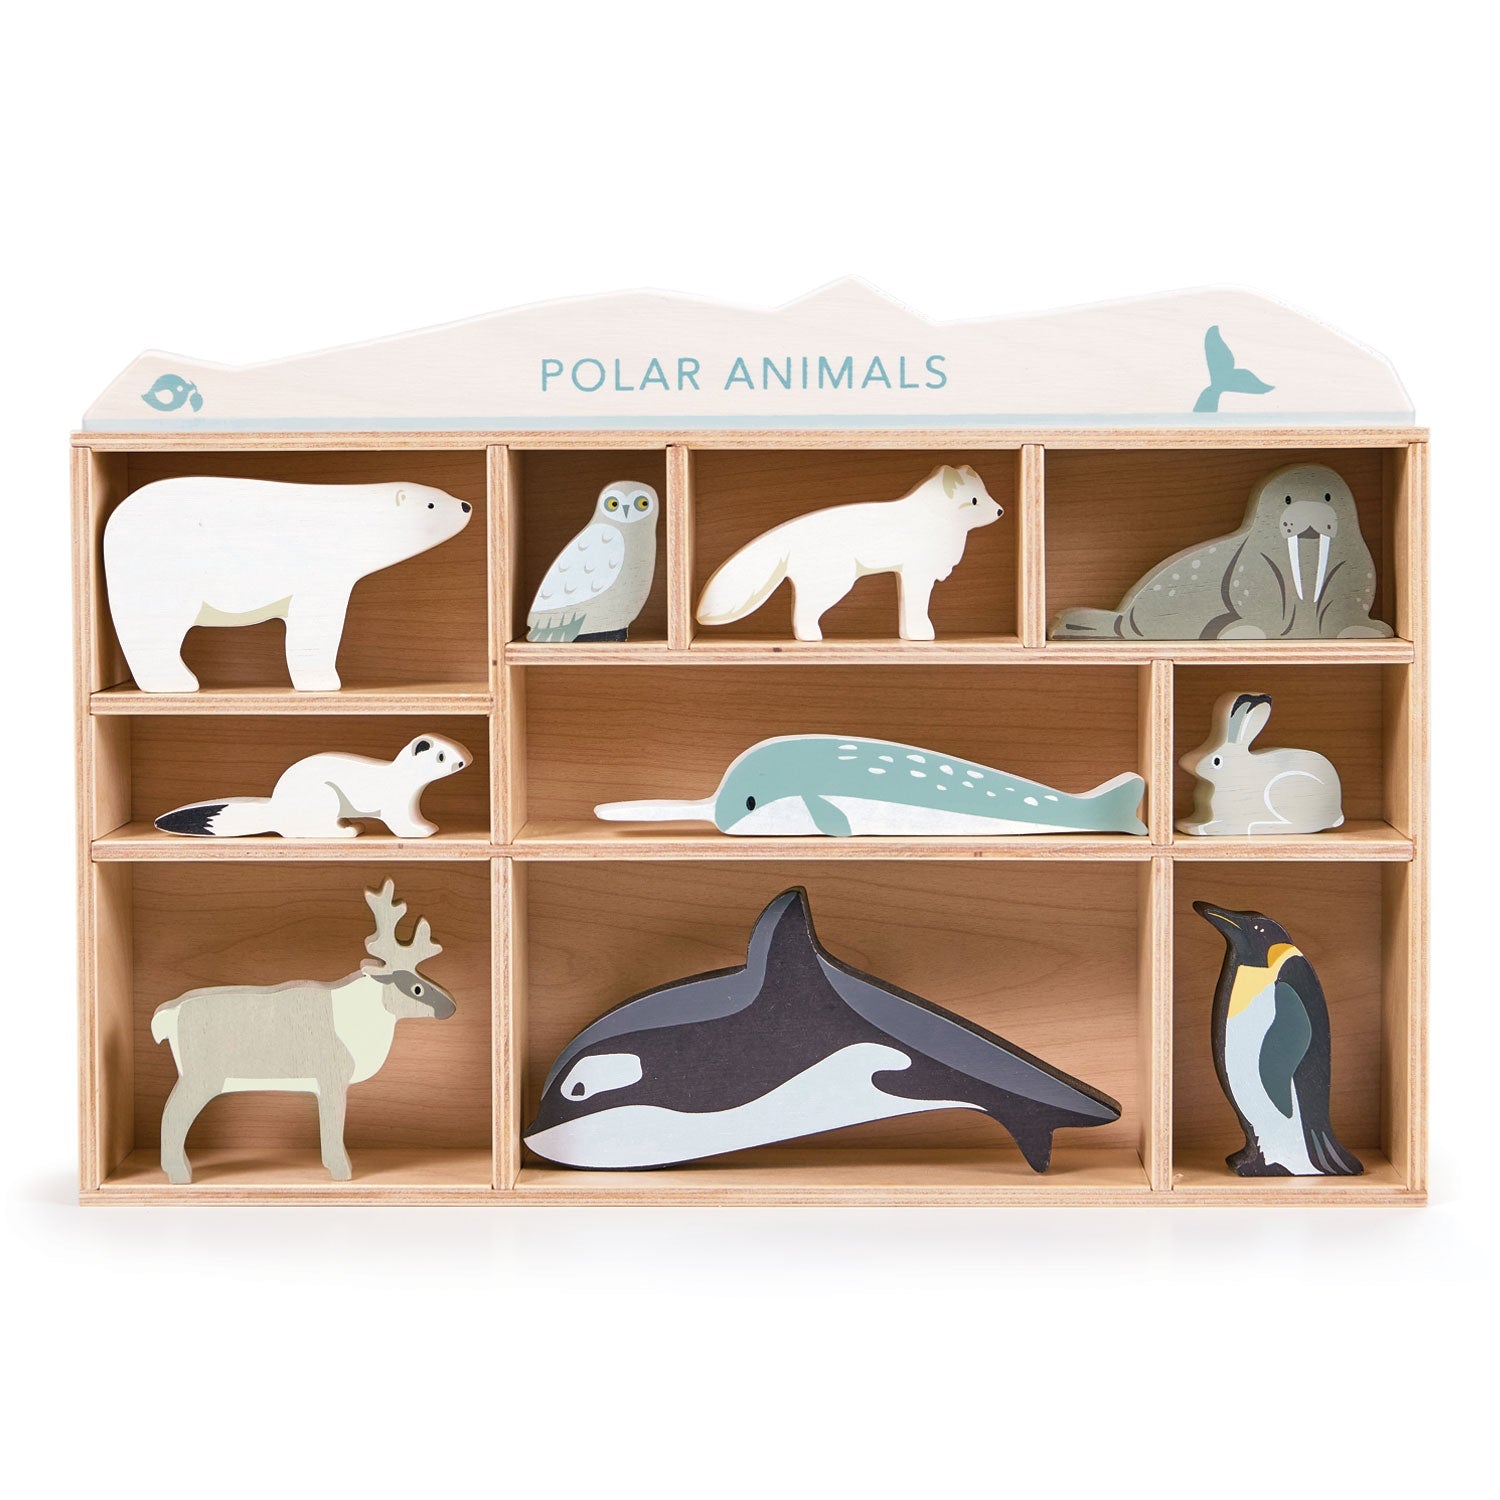 tender leaf toys collection of polar animals in a shelf box